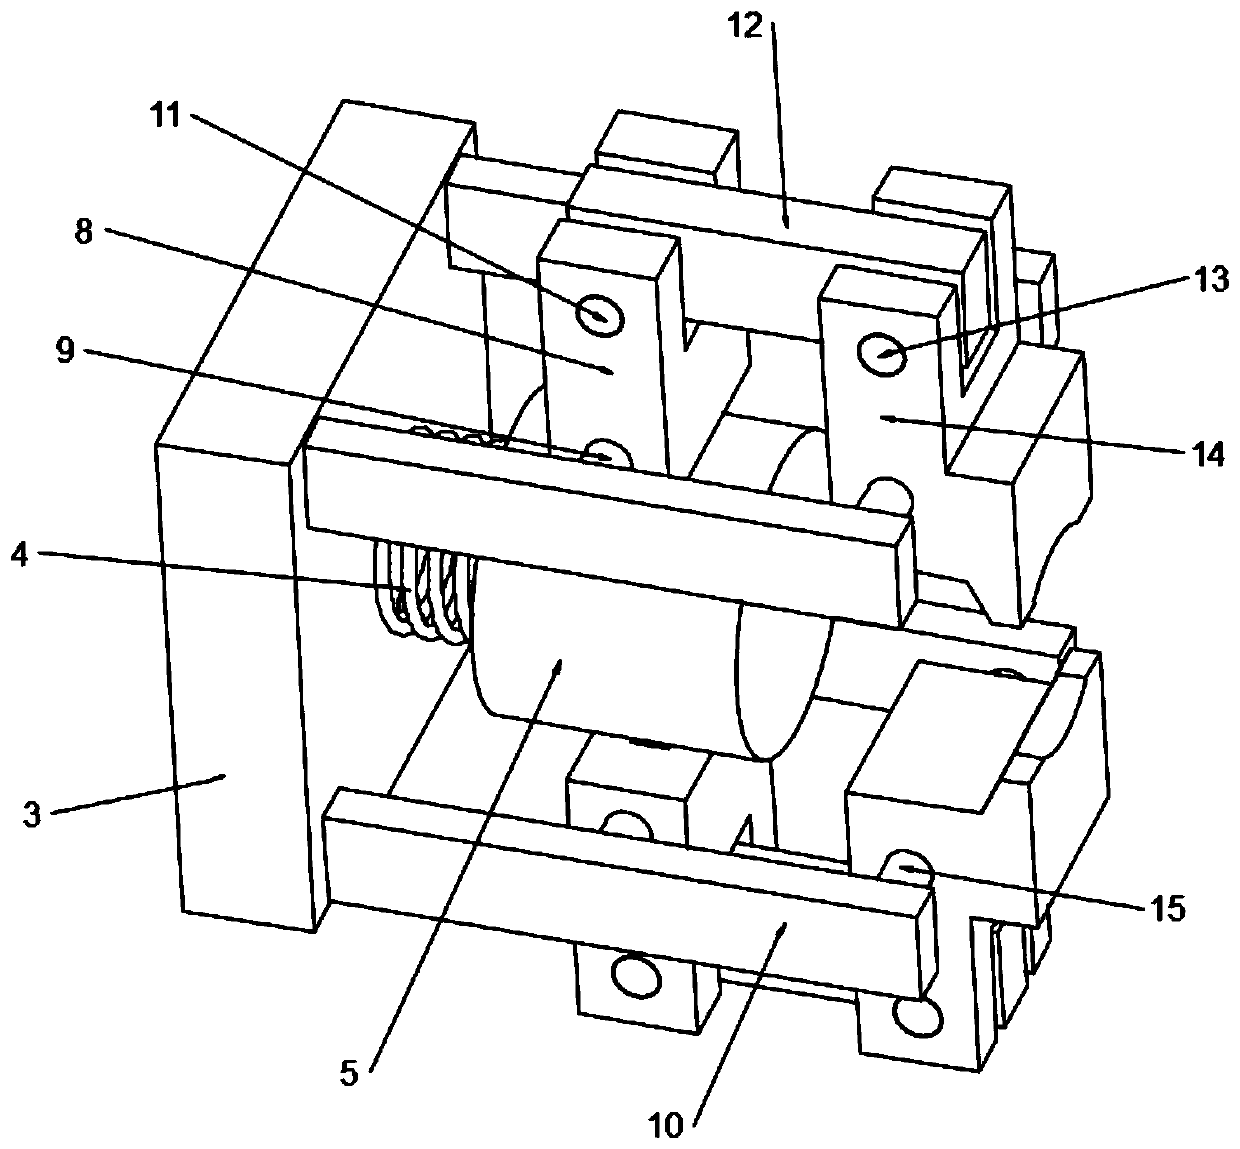 Building timber cutting device